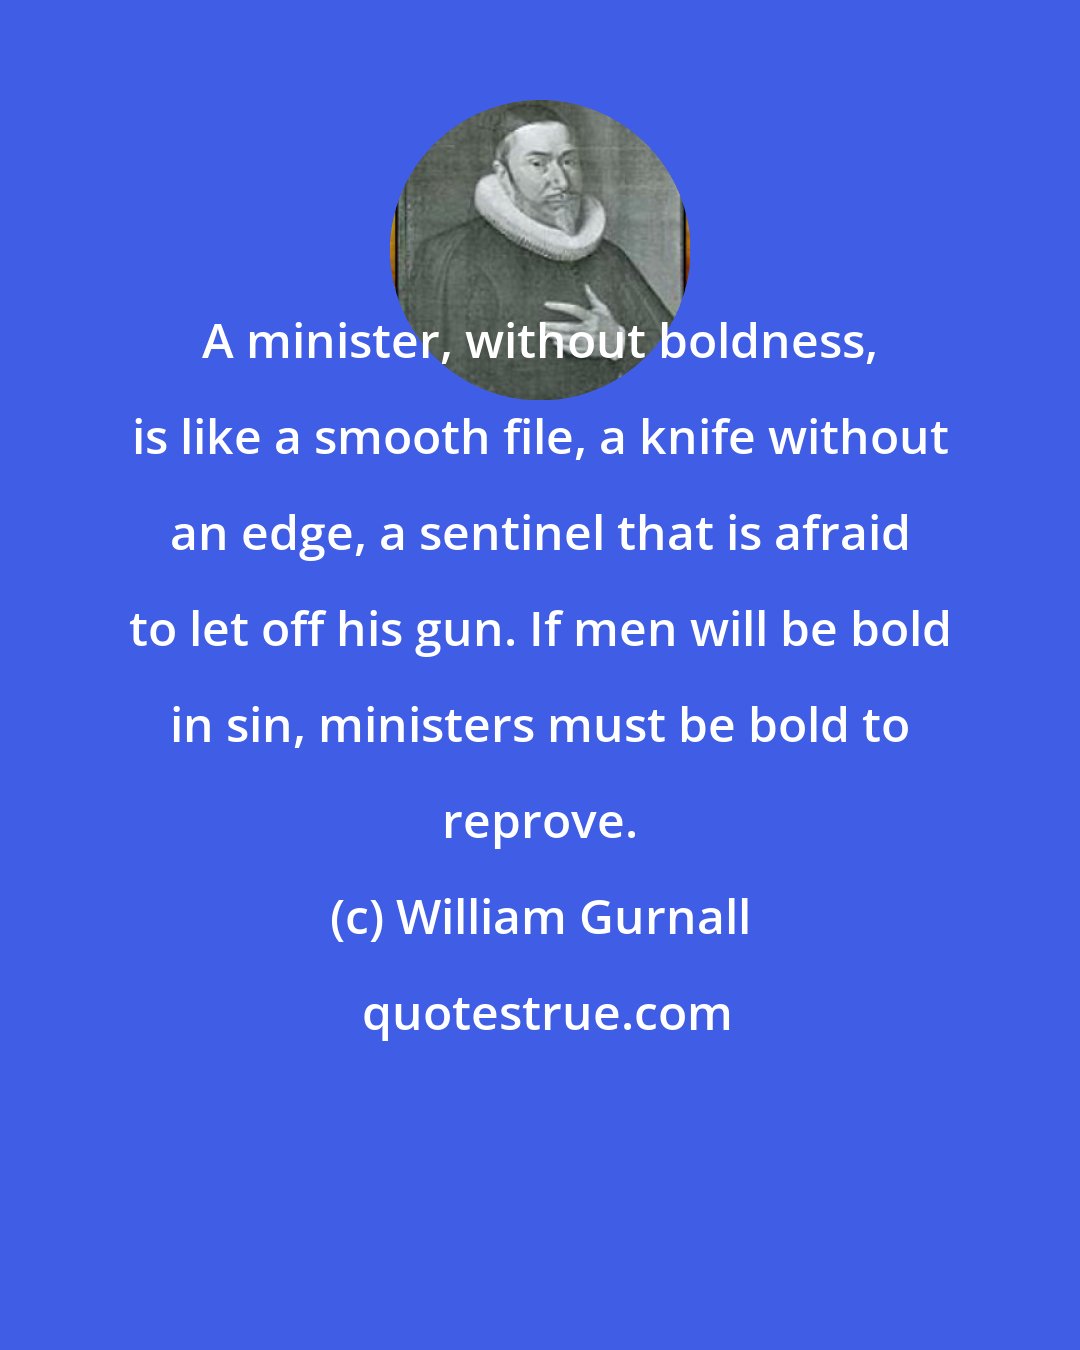 William Gurnall: A minister, without boldness, is like a smooth file, a knife without an edge, a sentinel that is afraid to let off his gun. If men will be bold in sin, ministers must be bold to reprove.